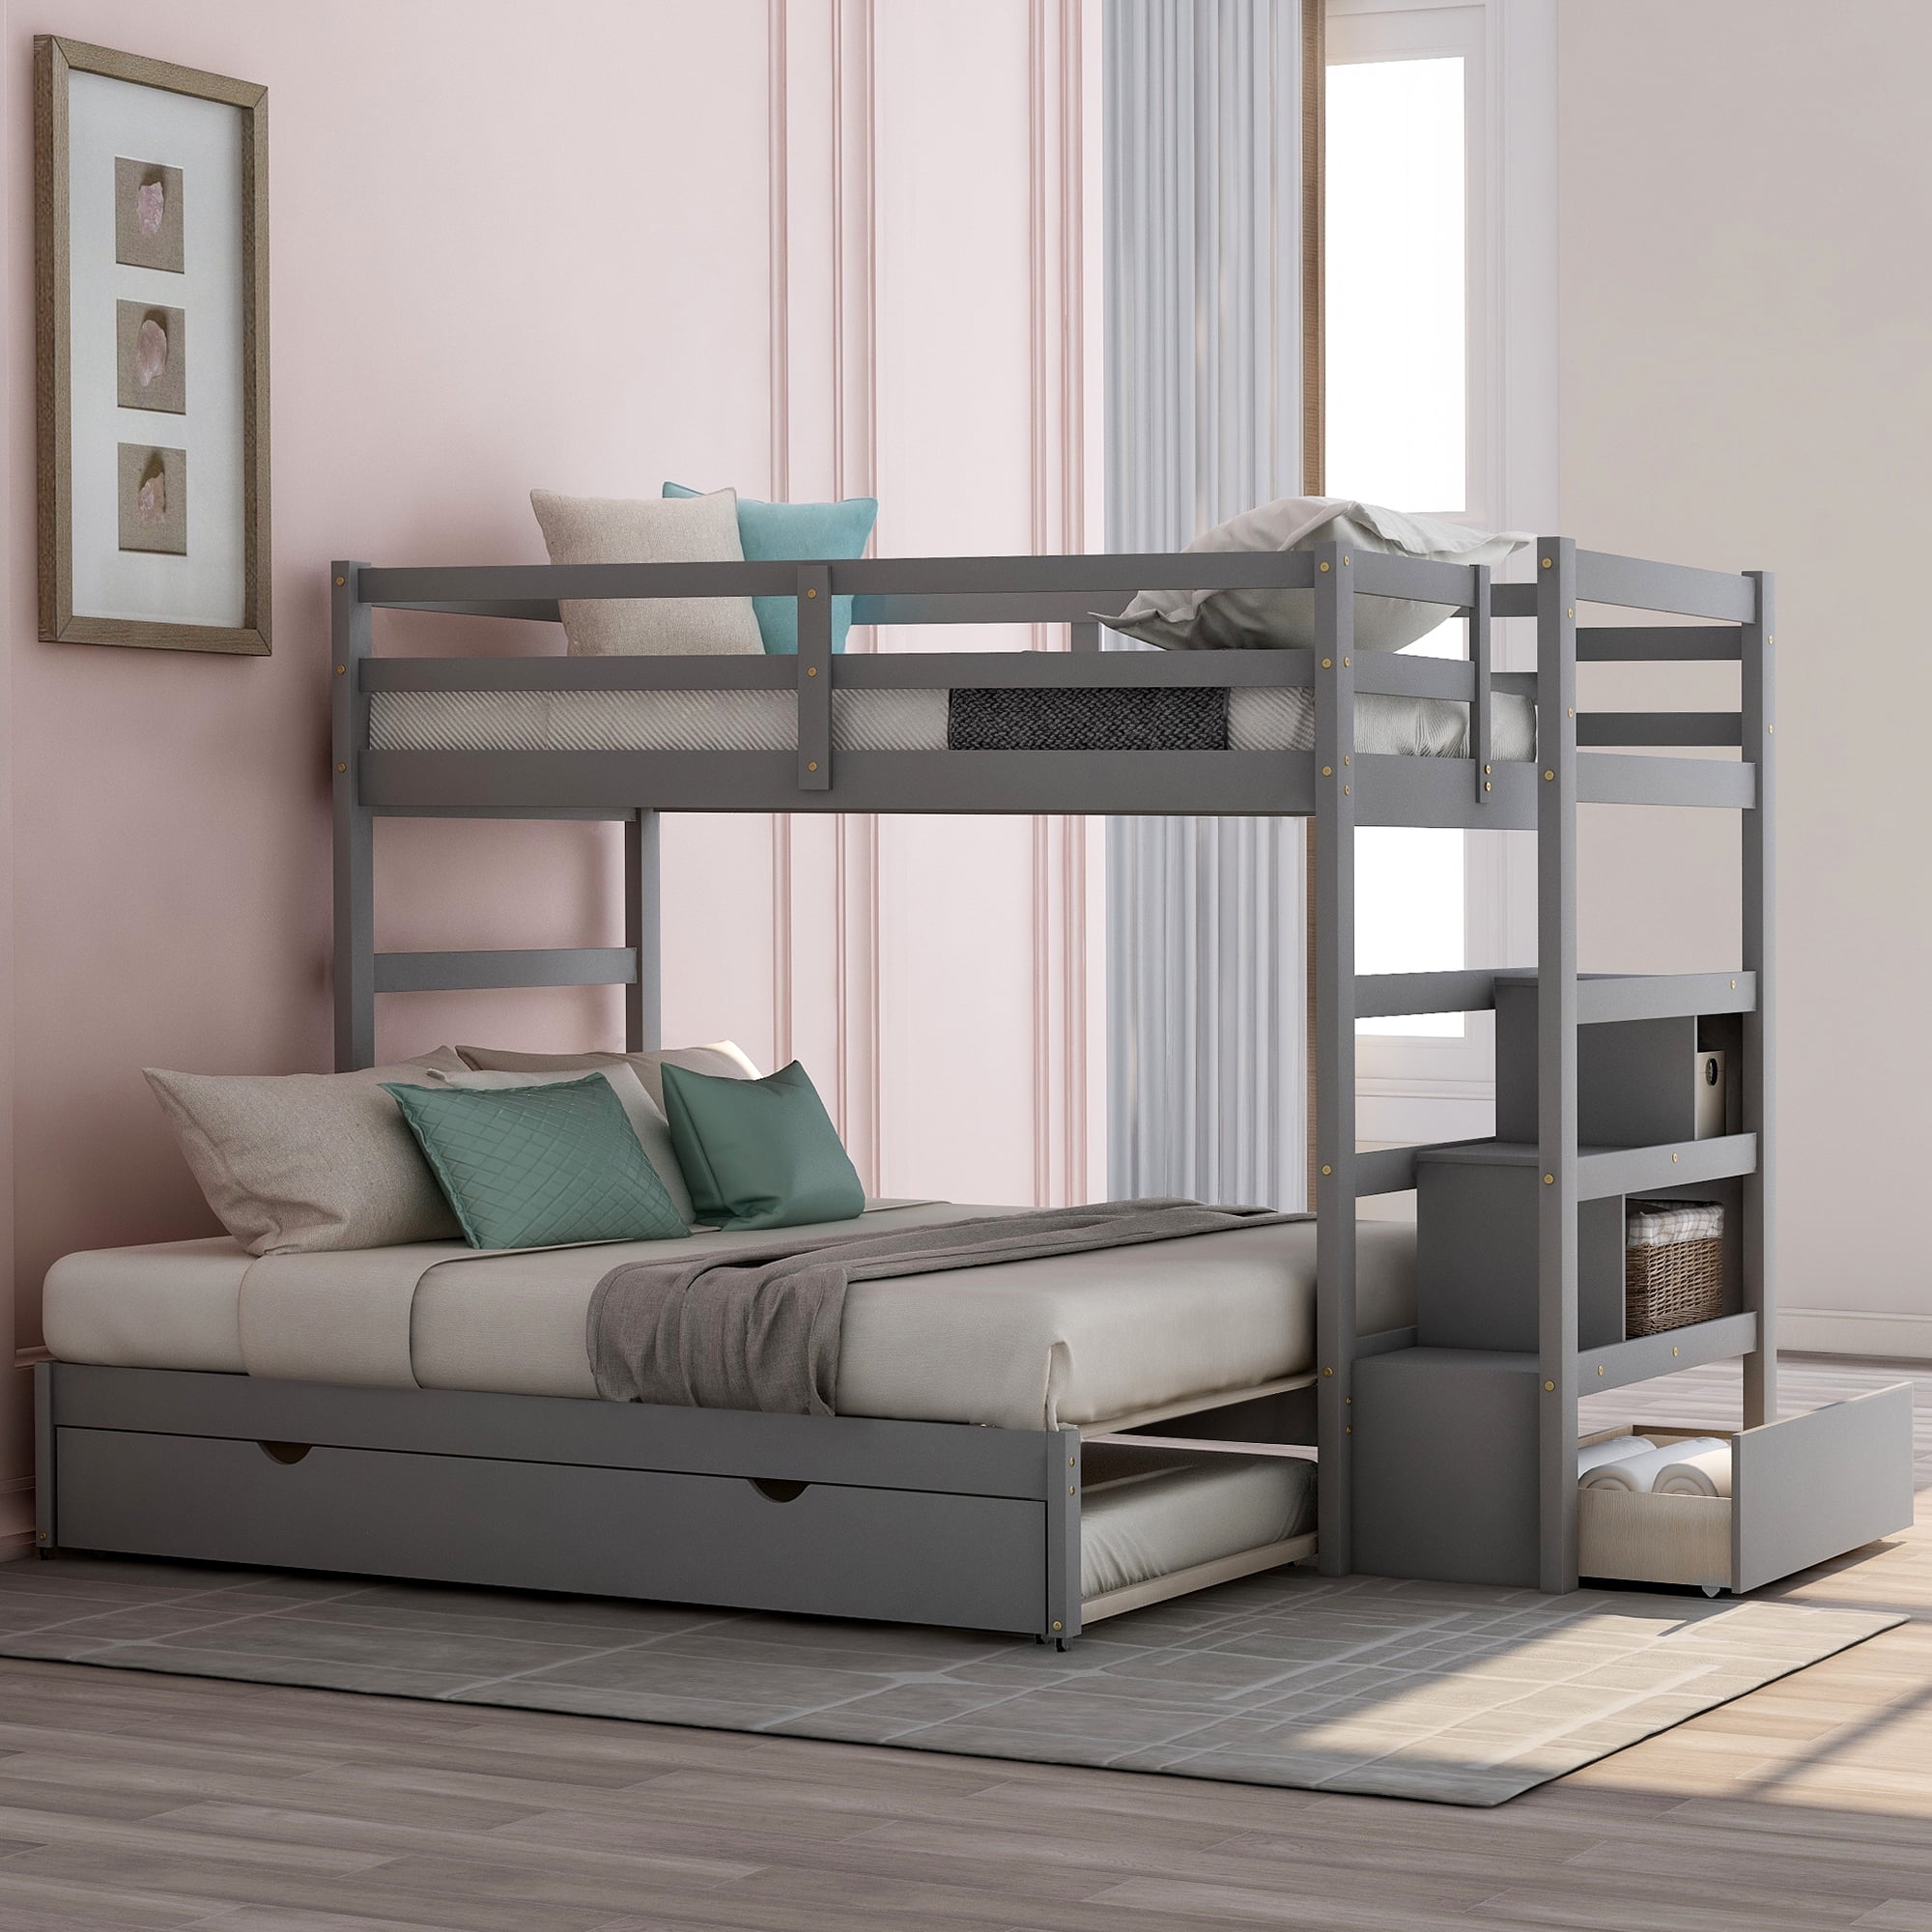 Jumper Twin Over King Bunk Bed With, King Size Bunk Bed